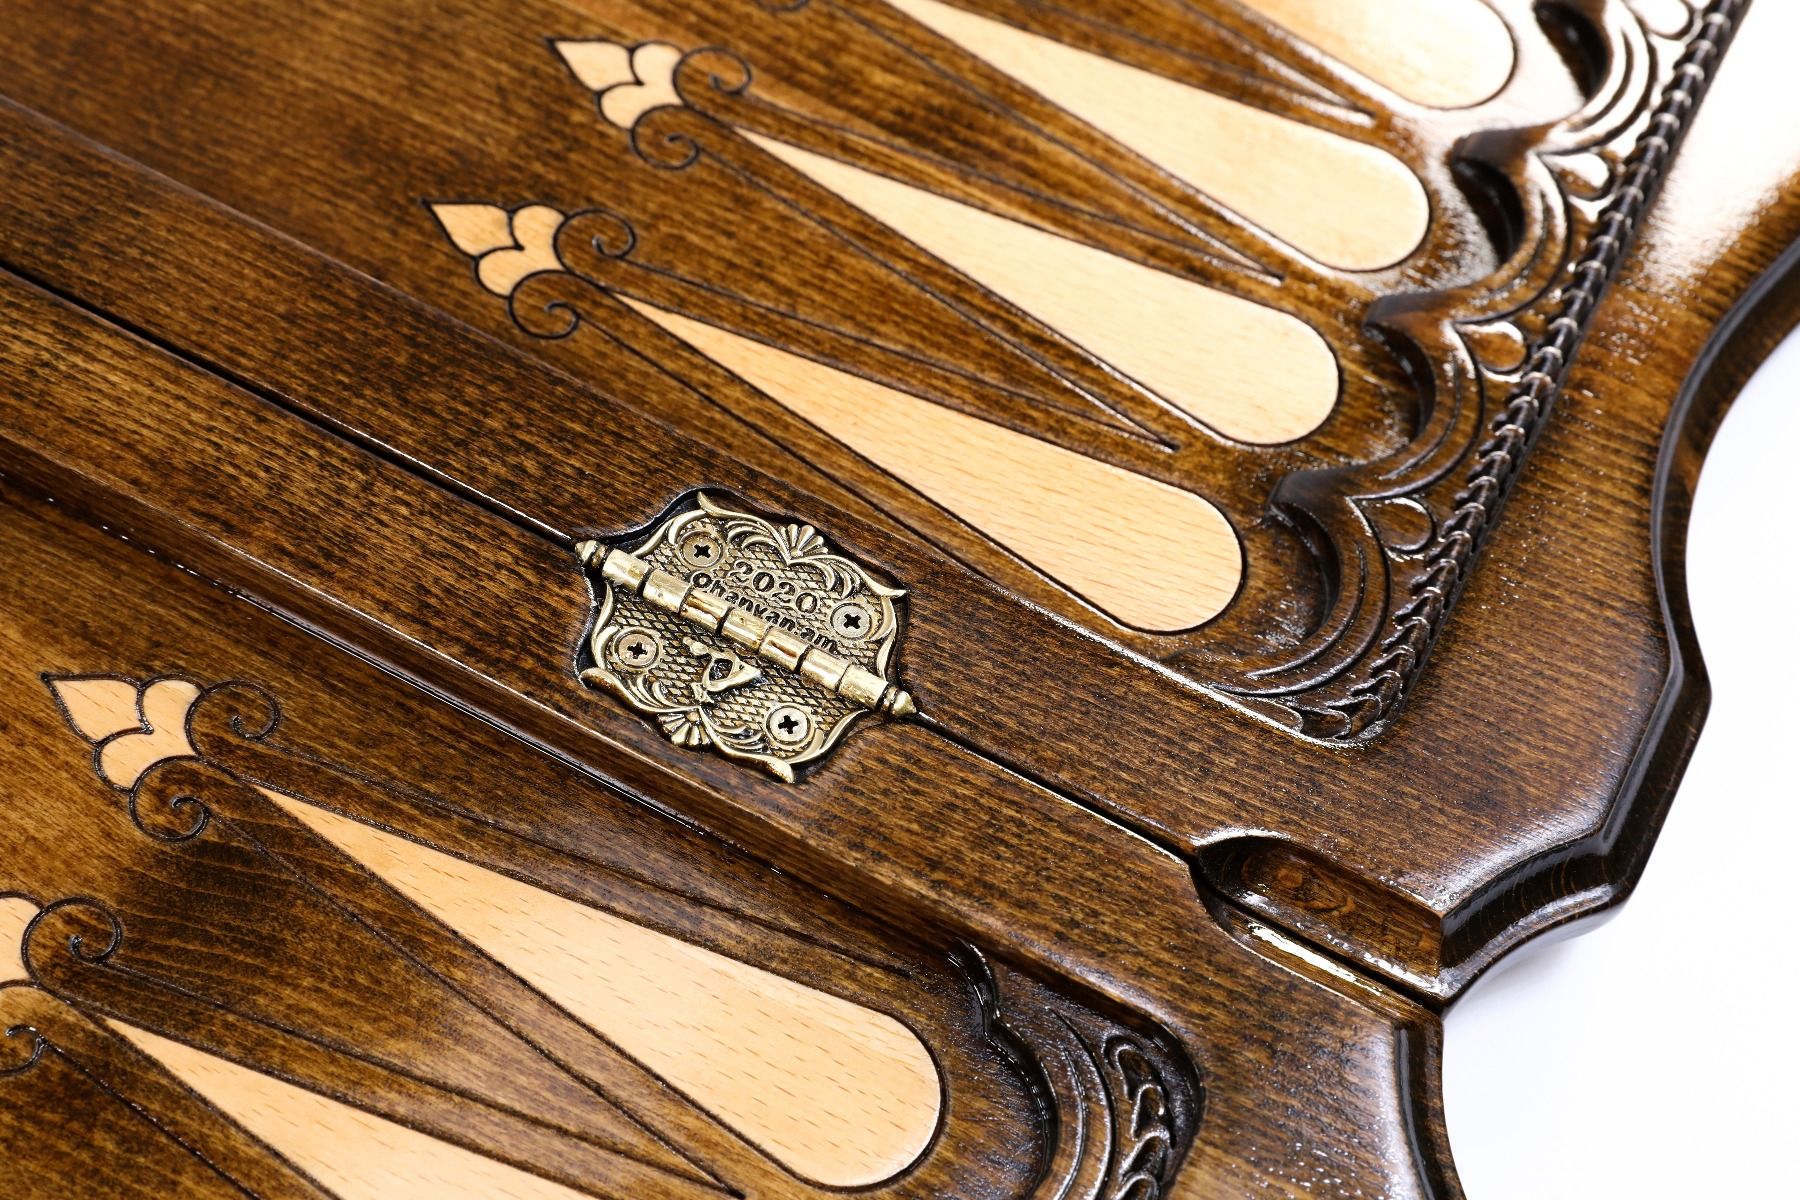 Celebrate the art and strategy of ancient Assyria with a wooden backgammon set featuring the iconic Coat of Arms.